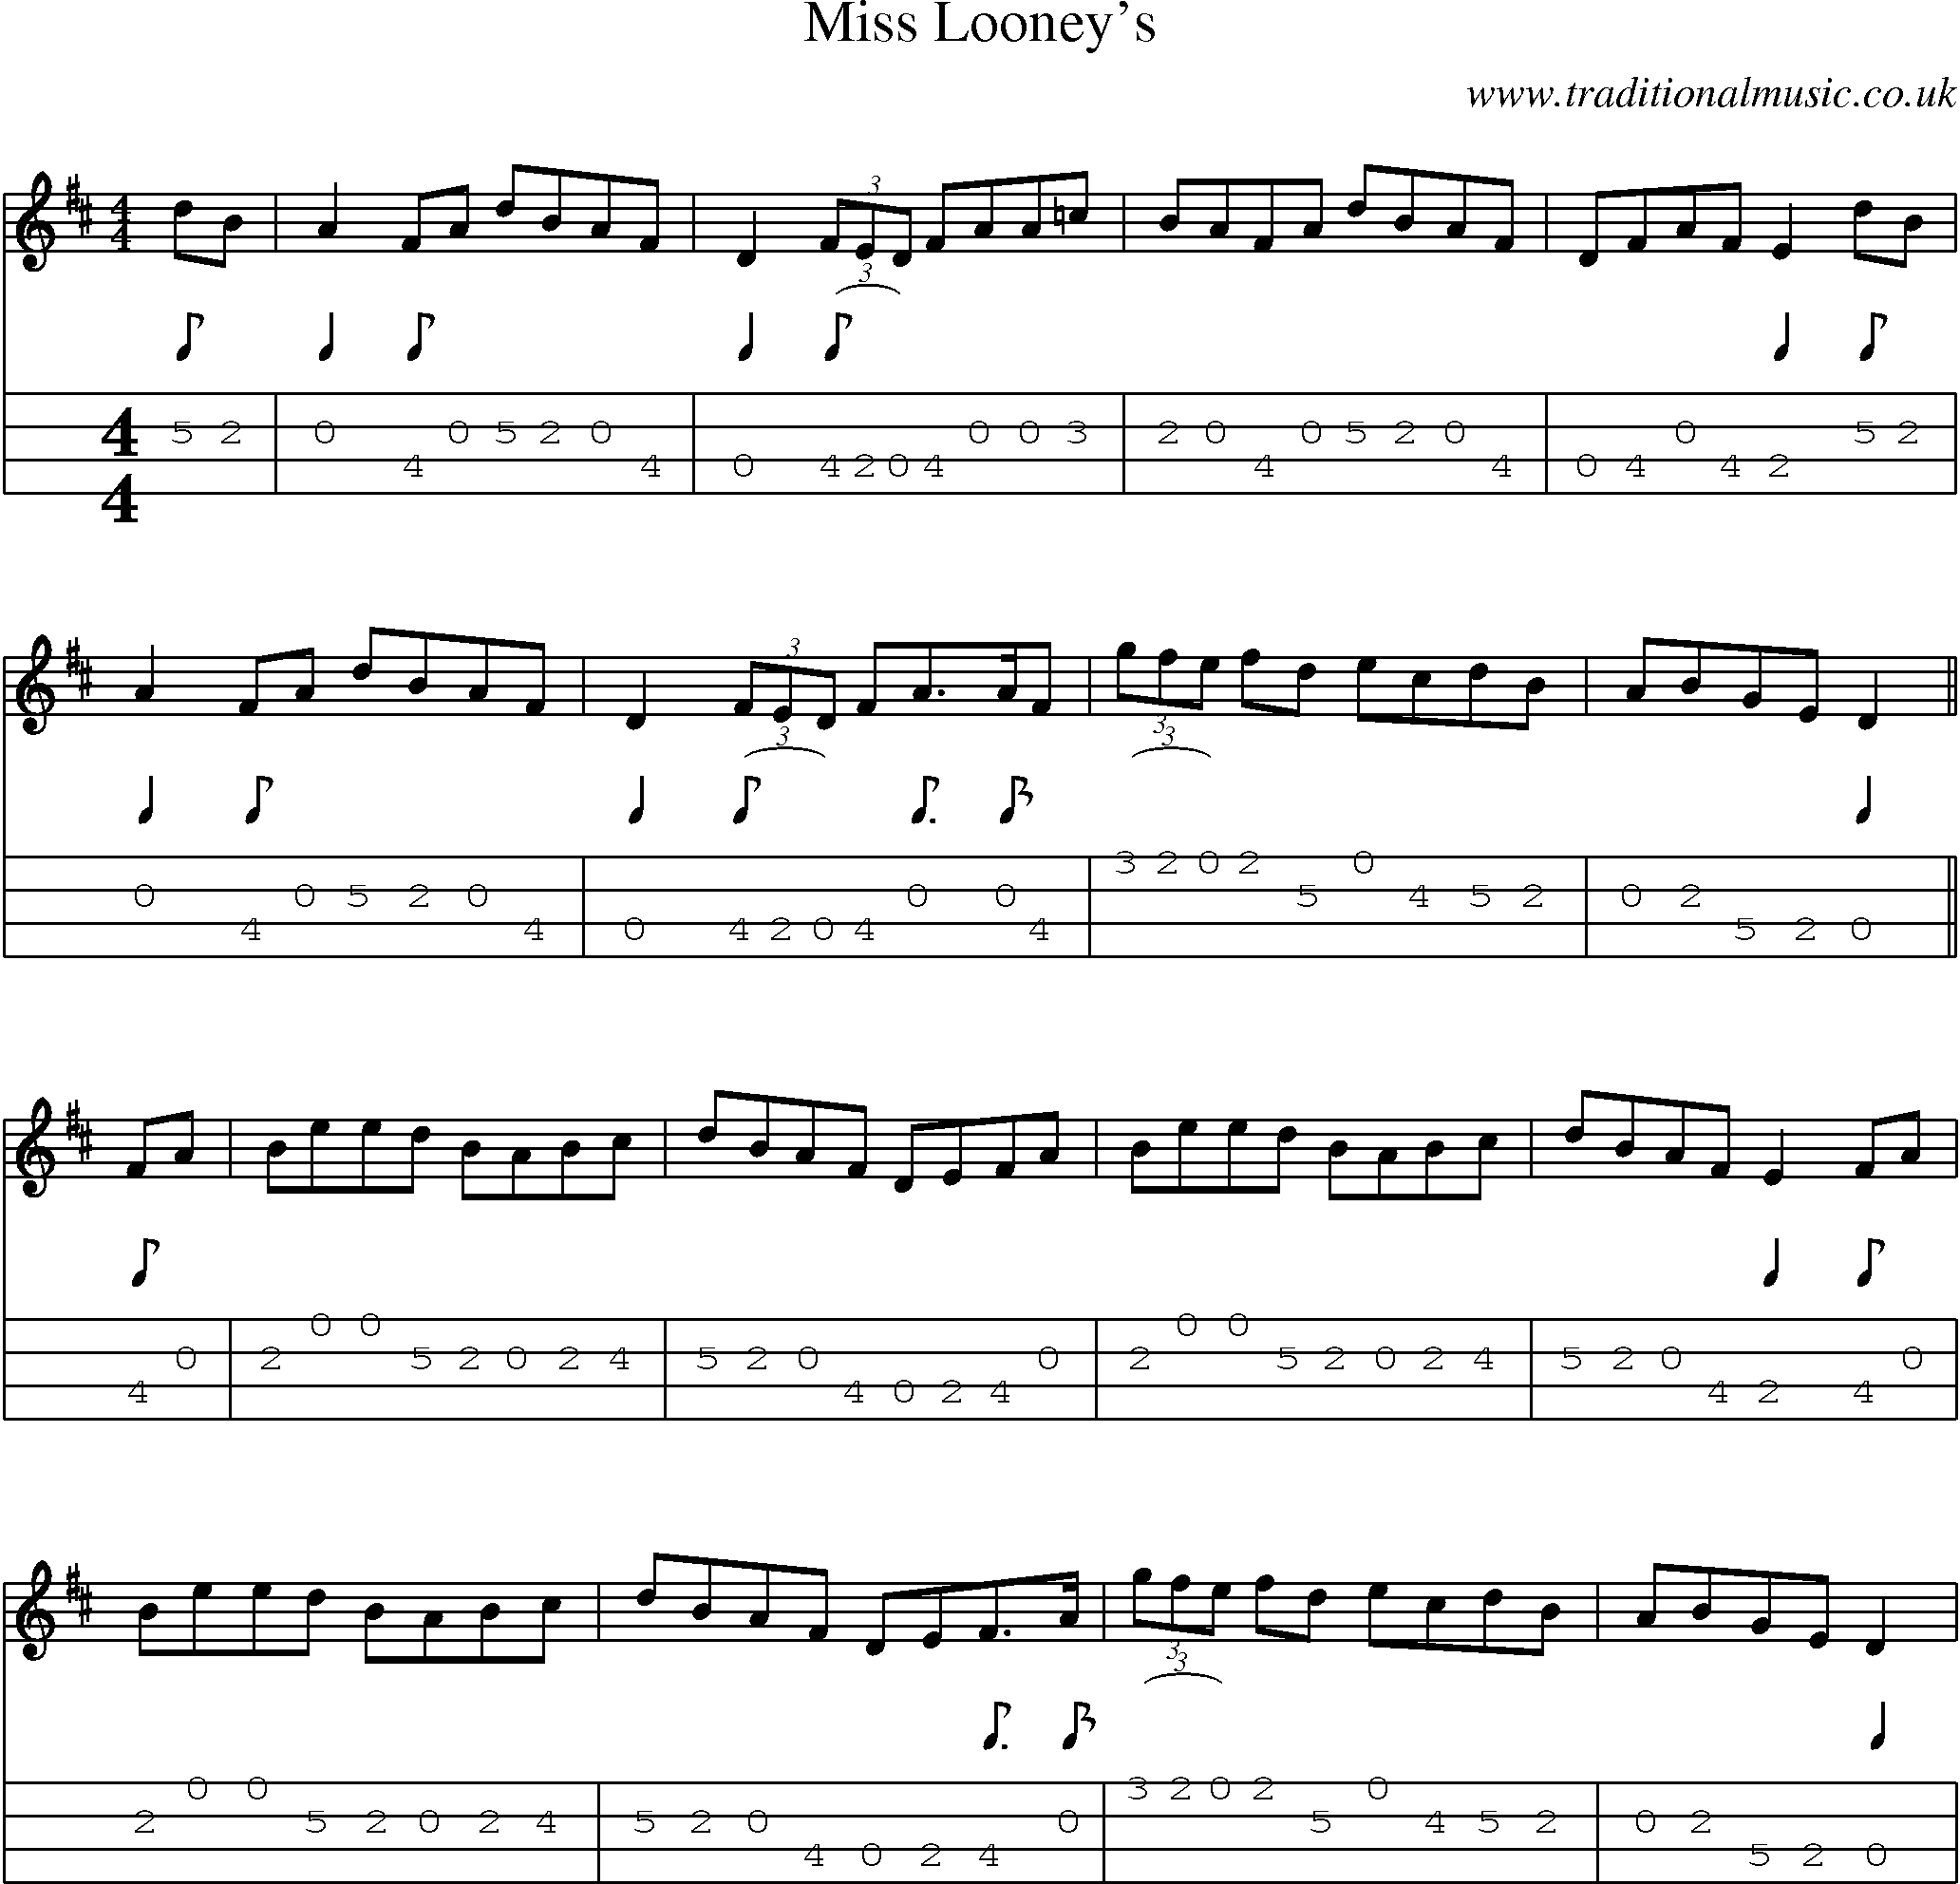 Music Score and Mandolin Tabs for Miss Looneys